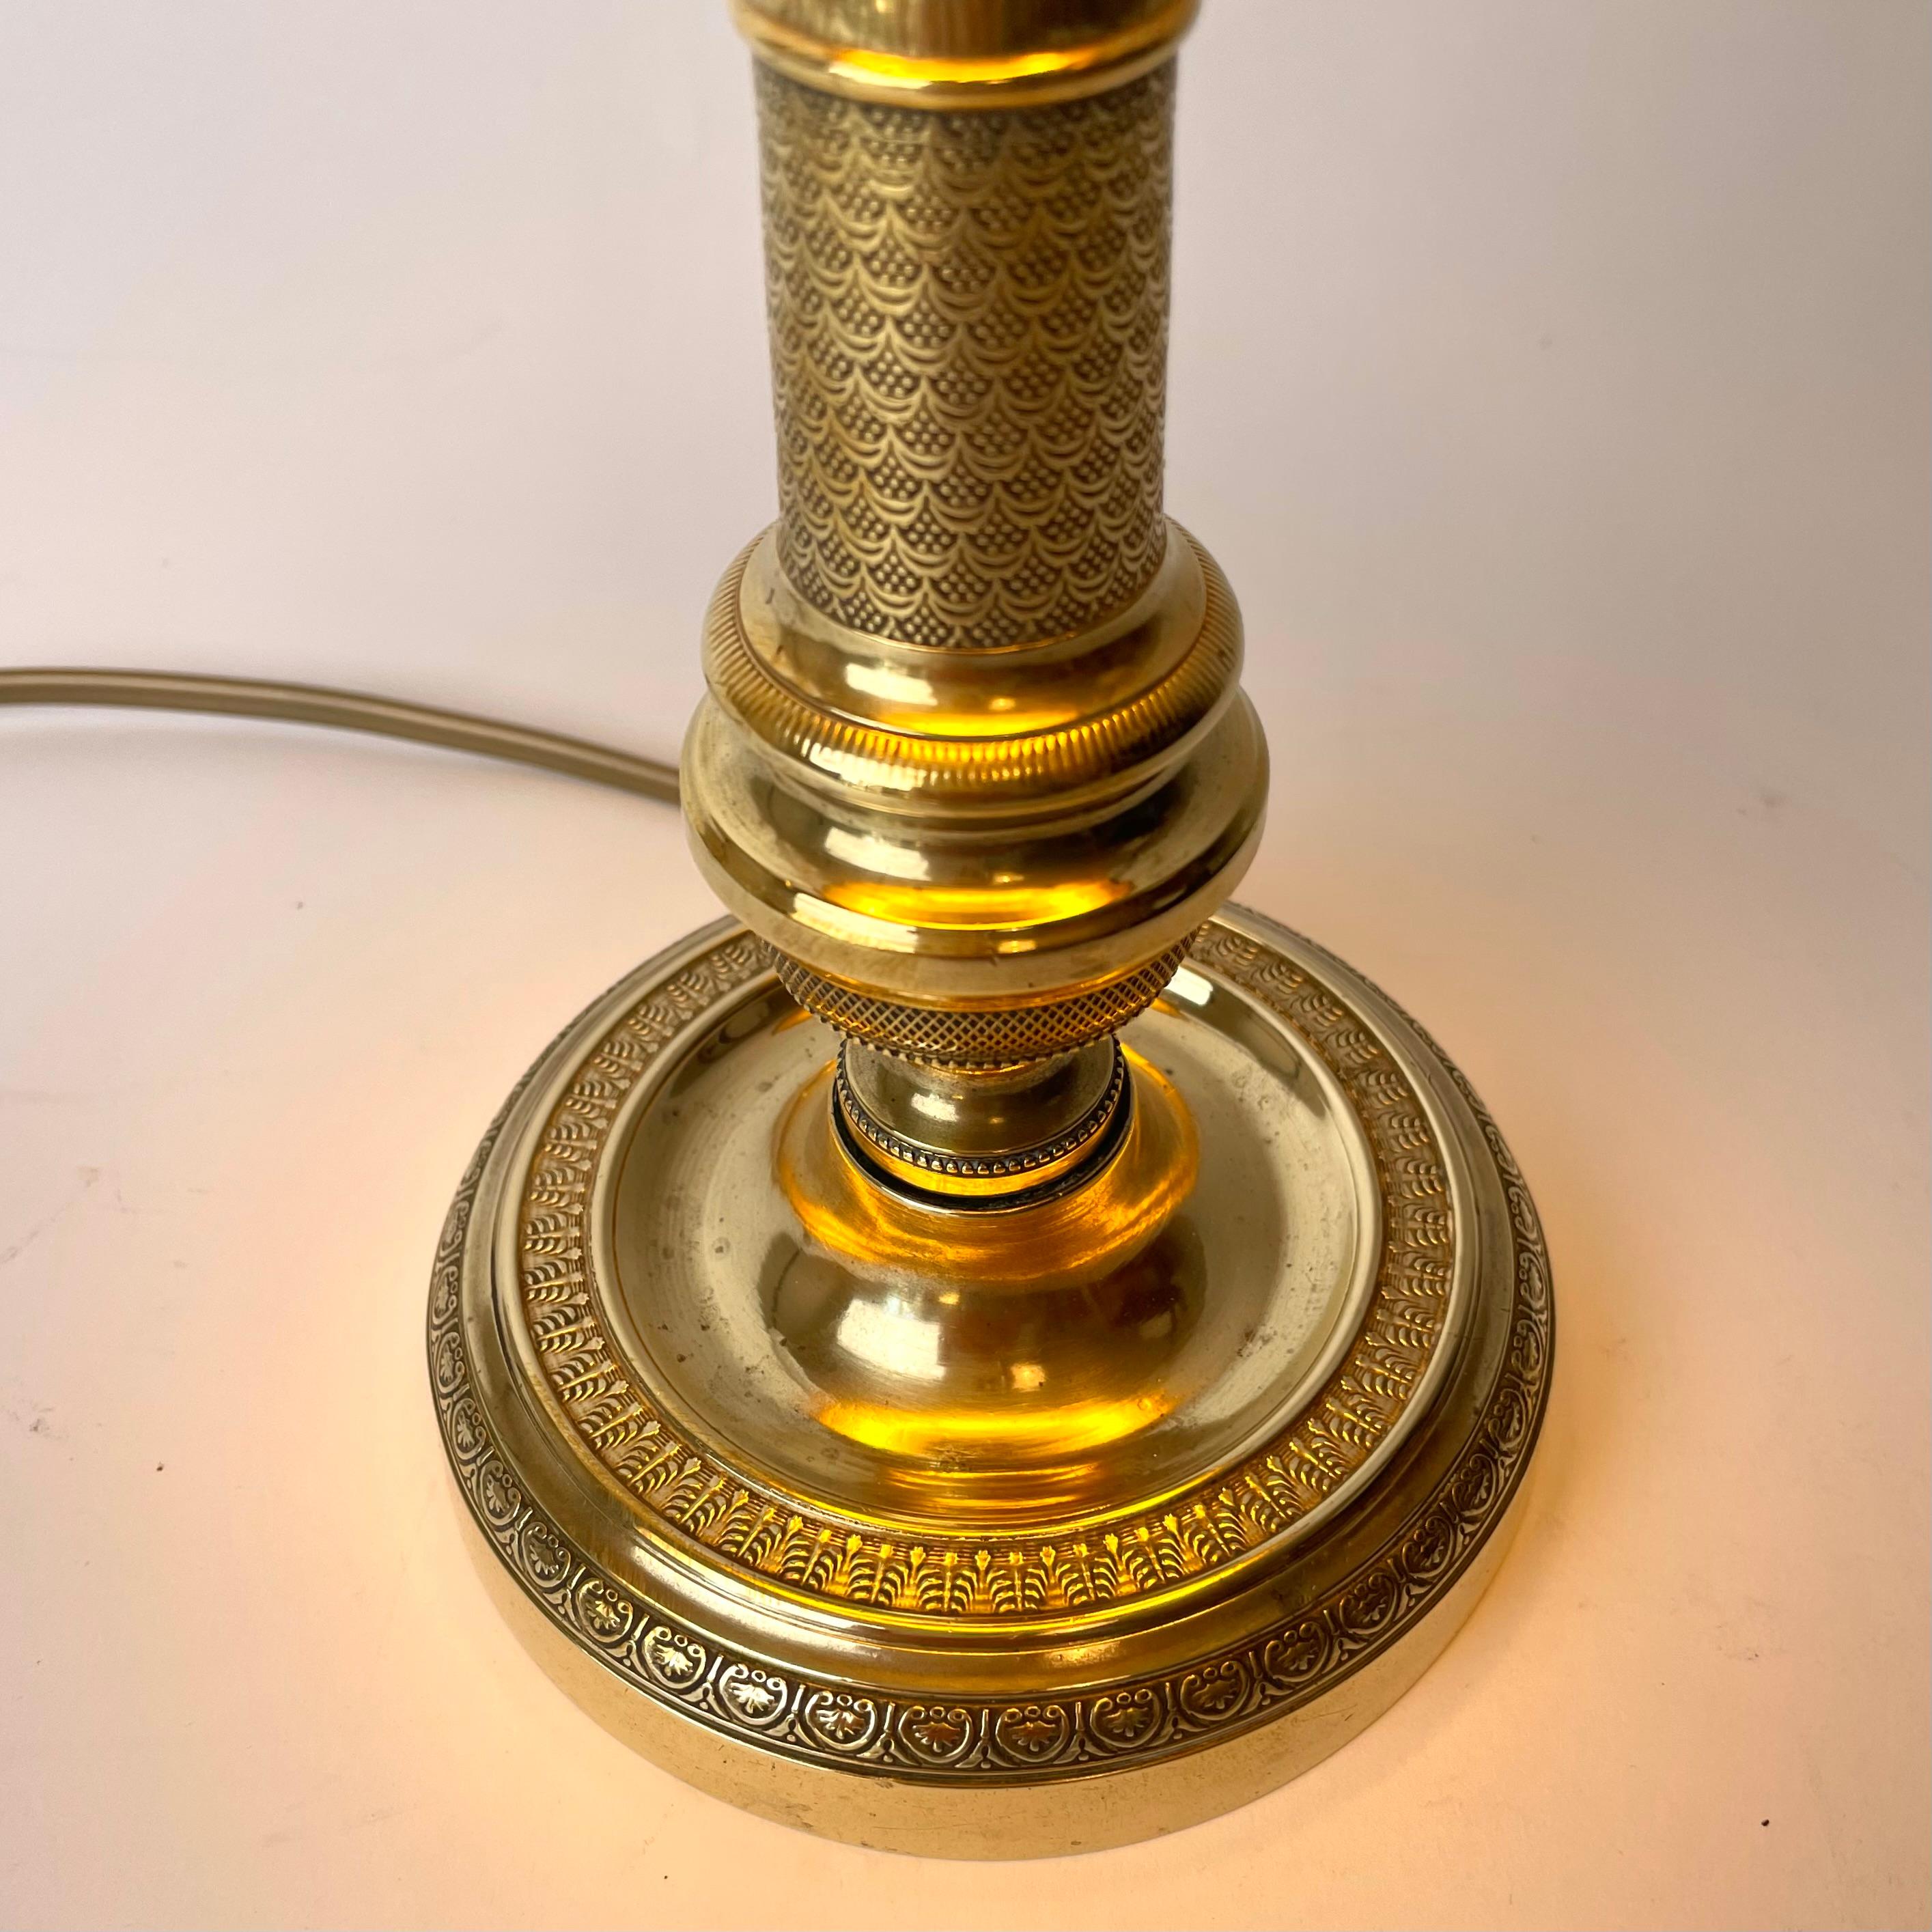 Elegant Table Lamp in Brass, 1820s French Empire, Originally Candlestick 1